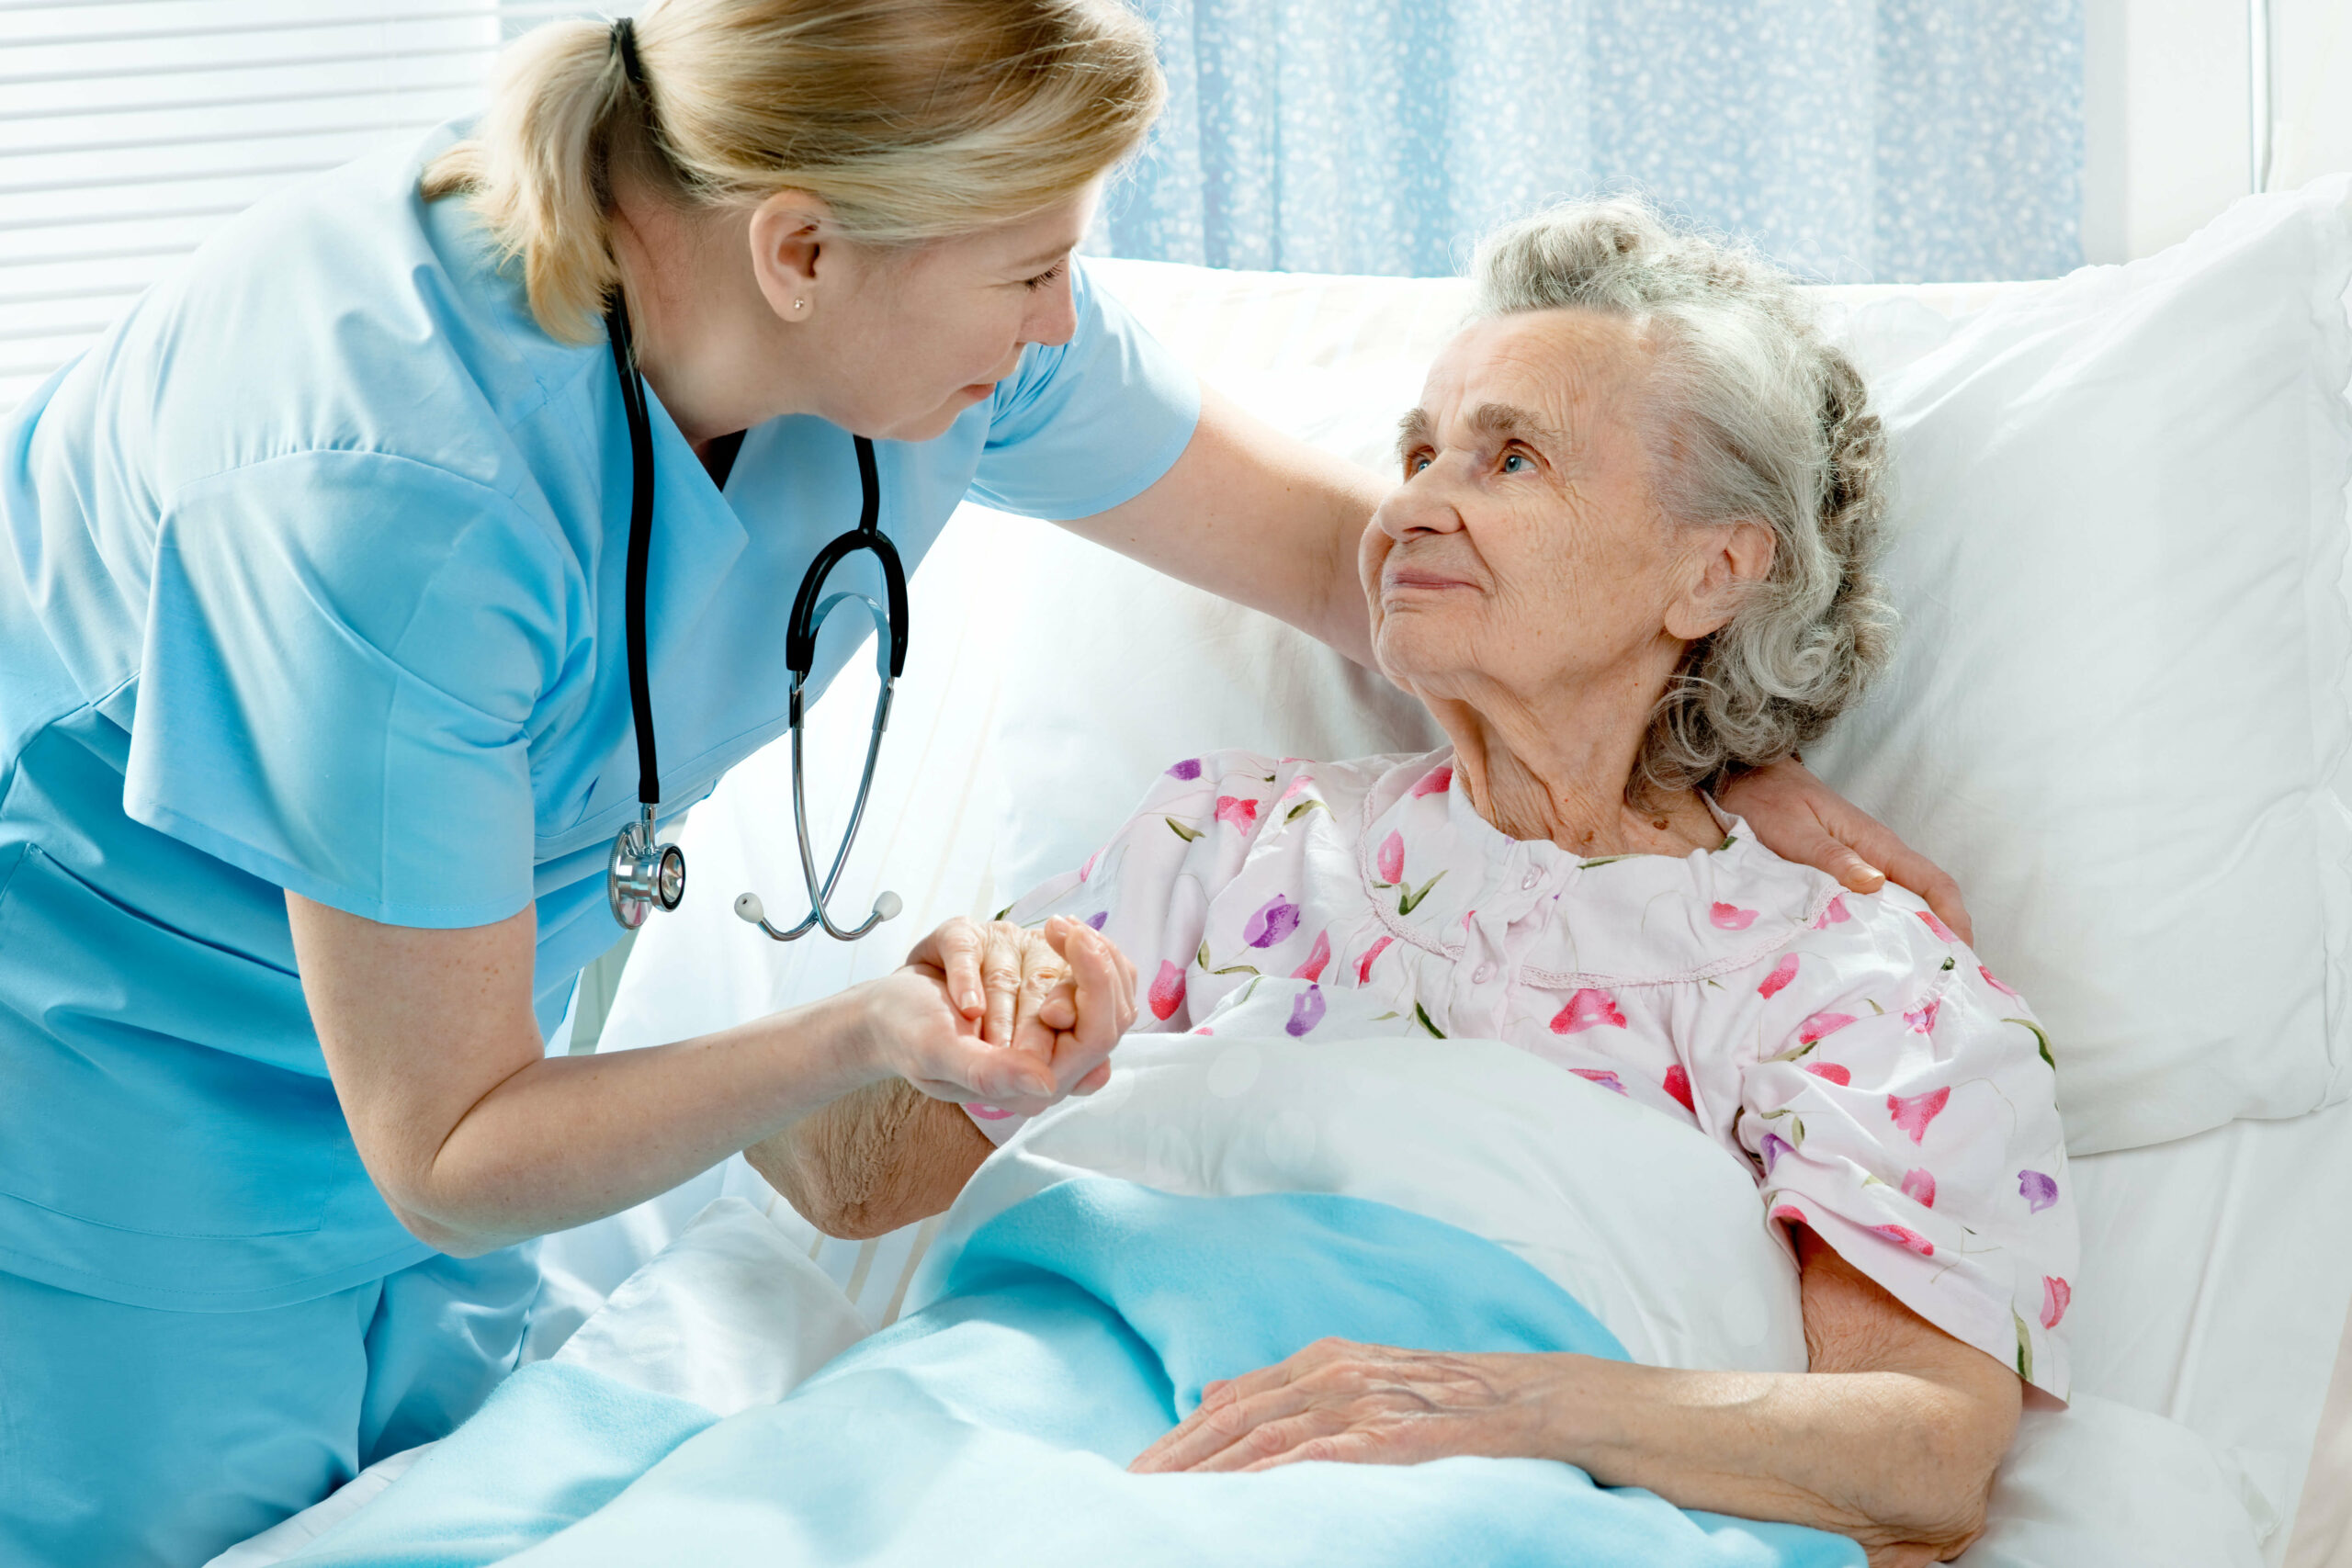 Nurse holding the hand of an older woman in a hospital bed